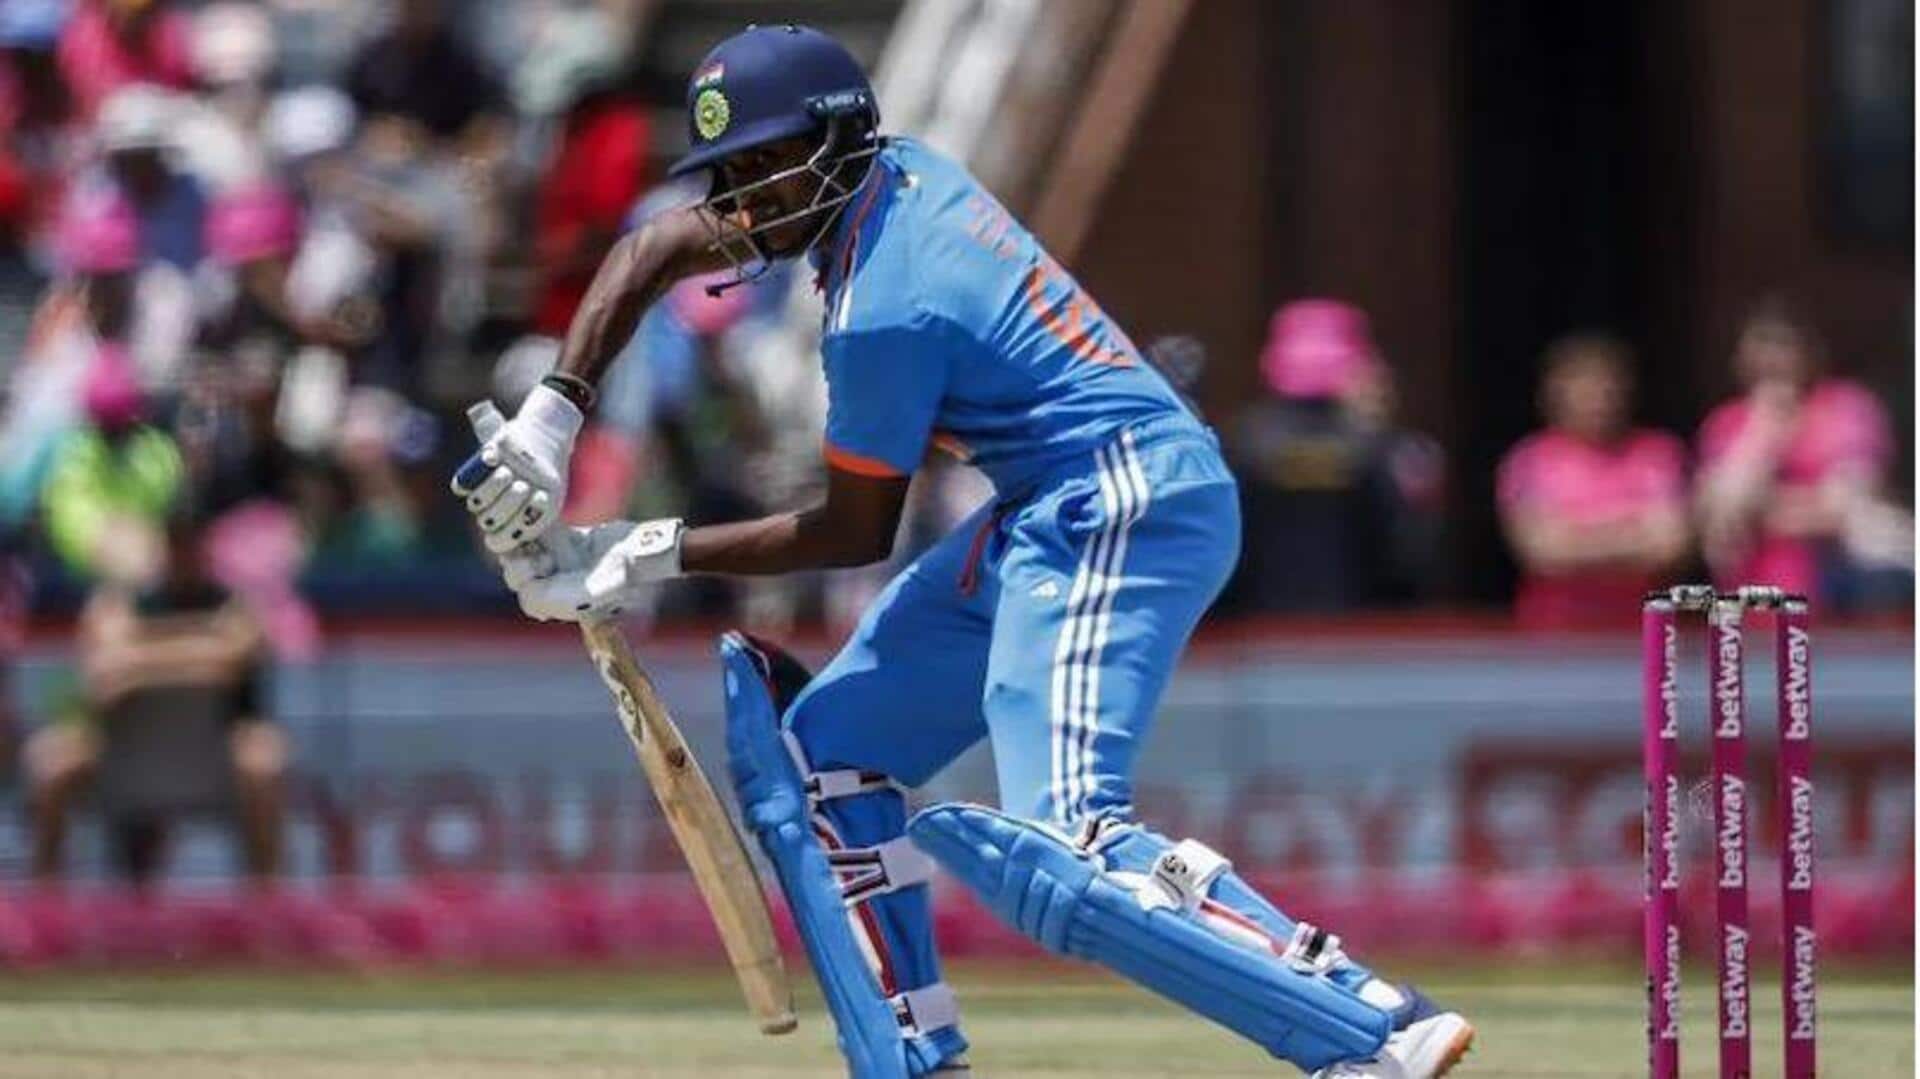 Sudharsan, Jitesh, Harshit included in India's squad for Zimbabwe T20Is